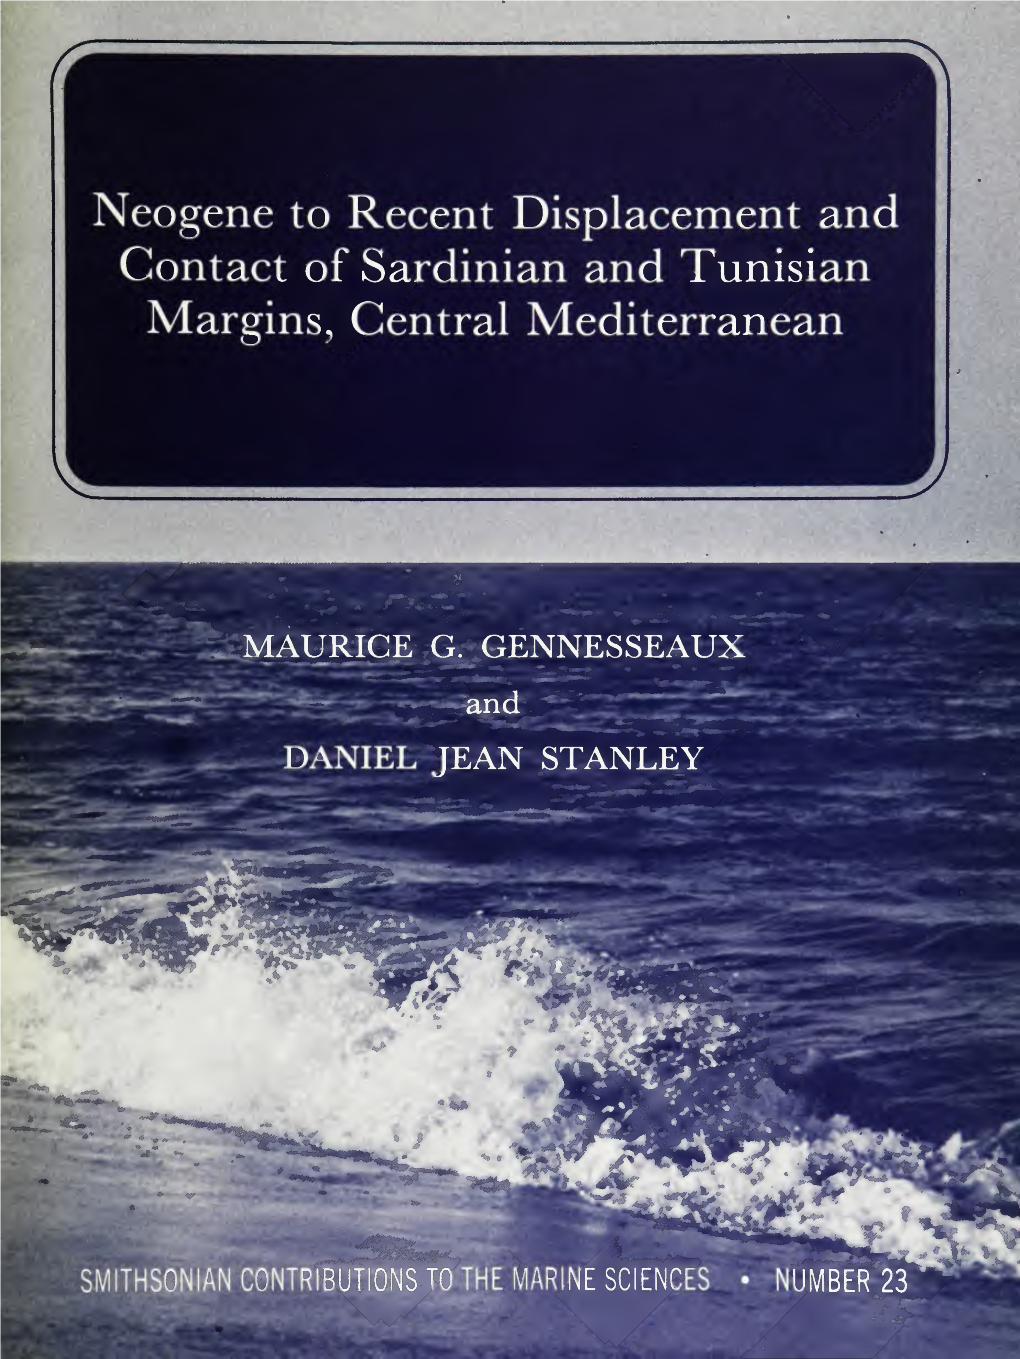 Neogene to Recent Displacement and Contact of Sardinian and Tunisian Margins, Central Mediterranean